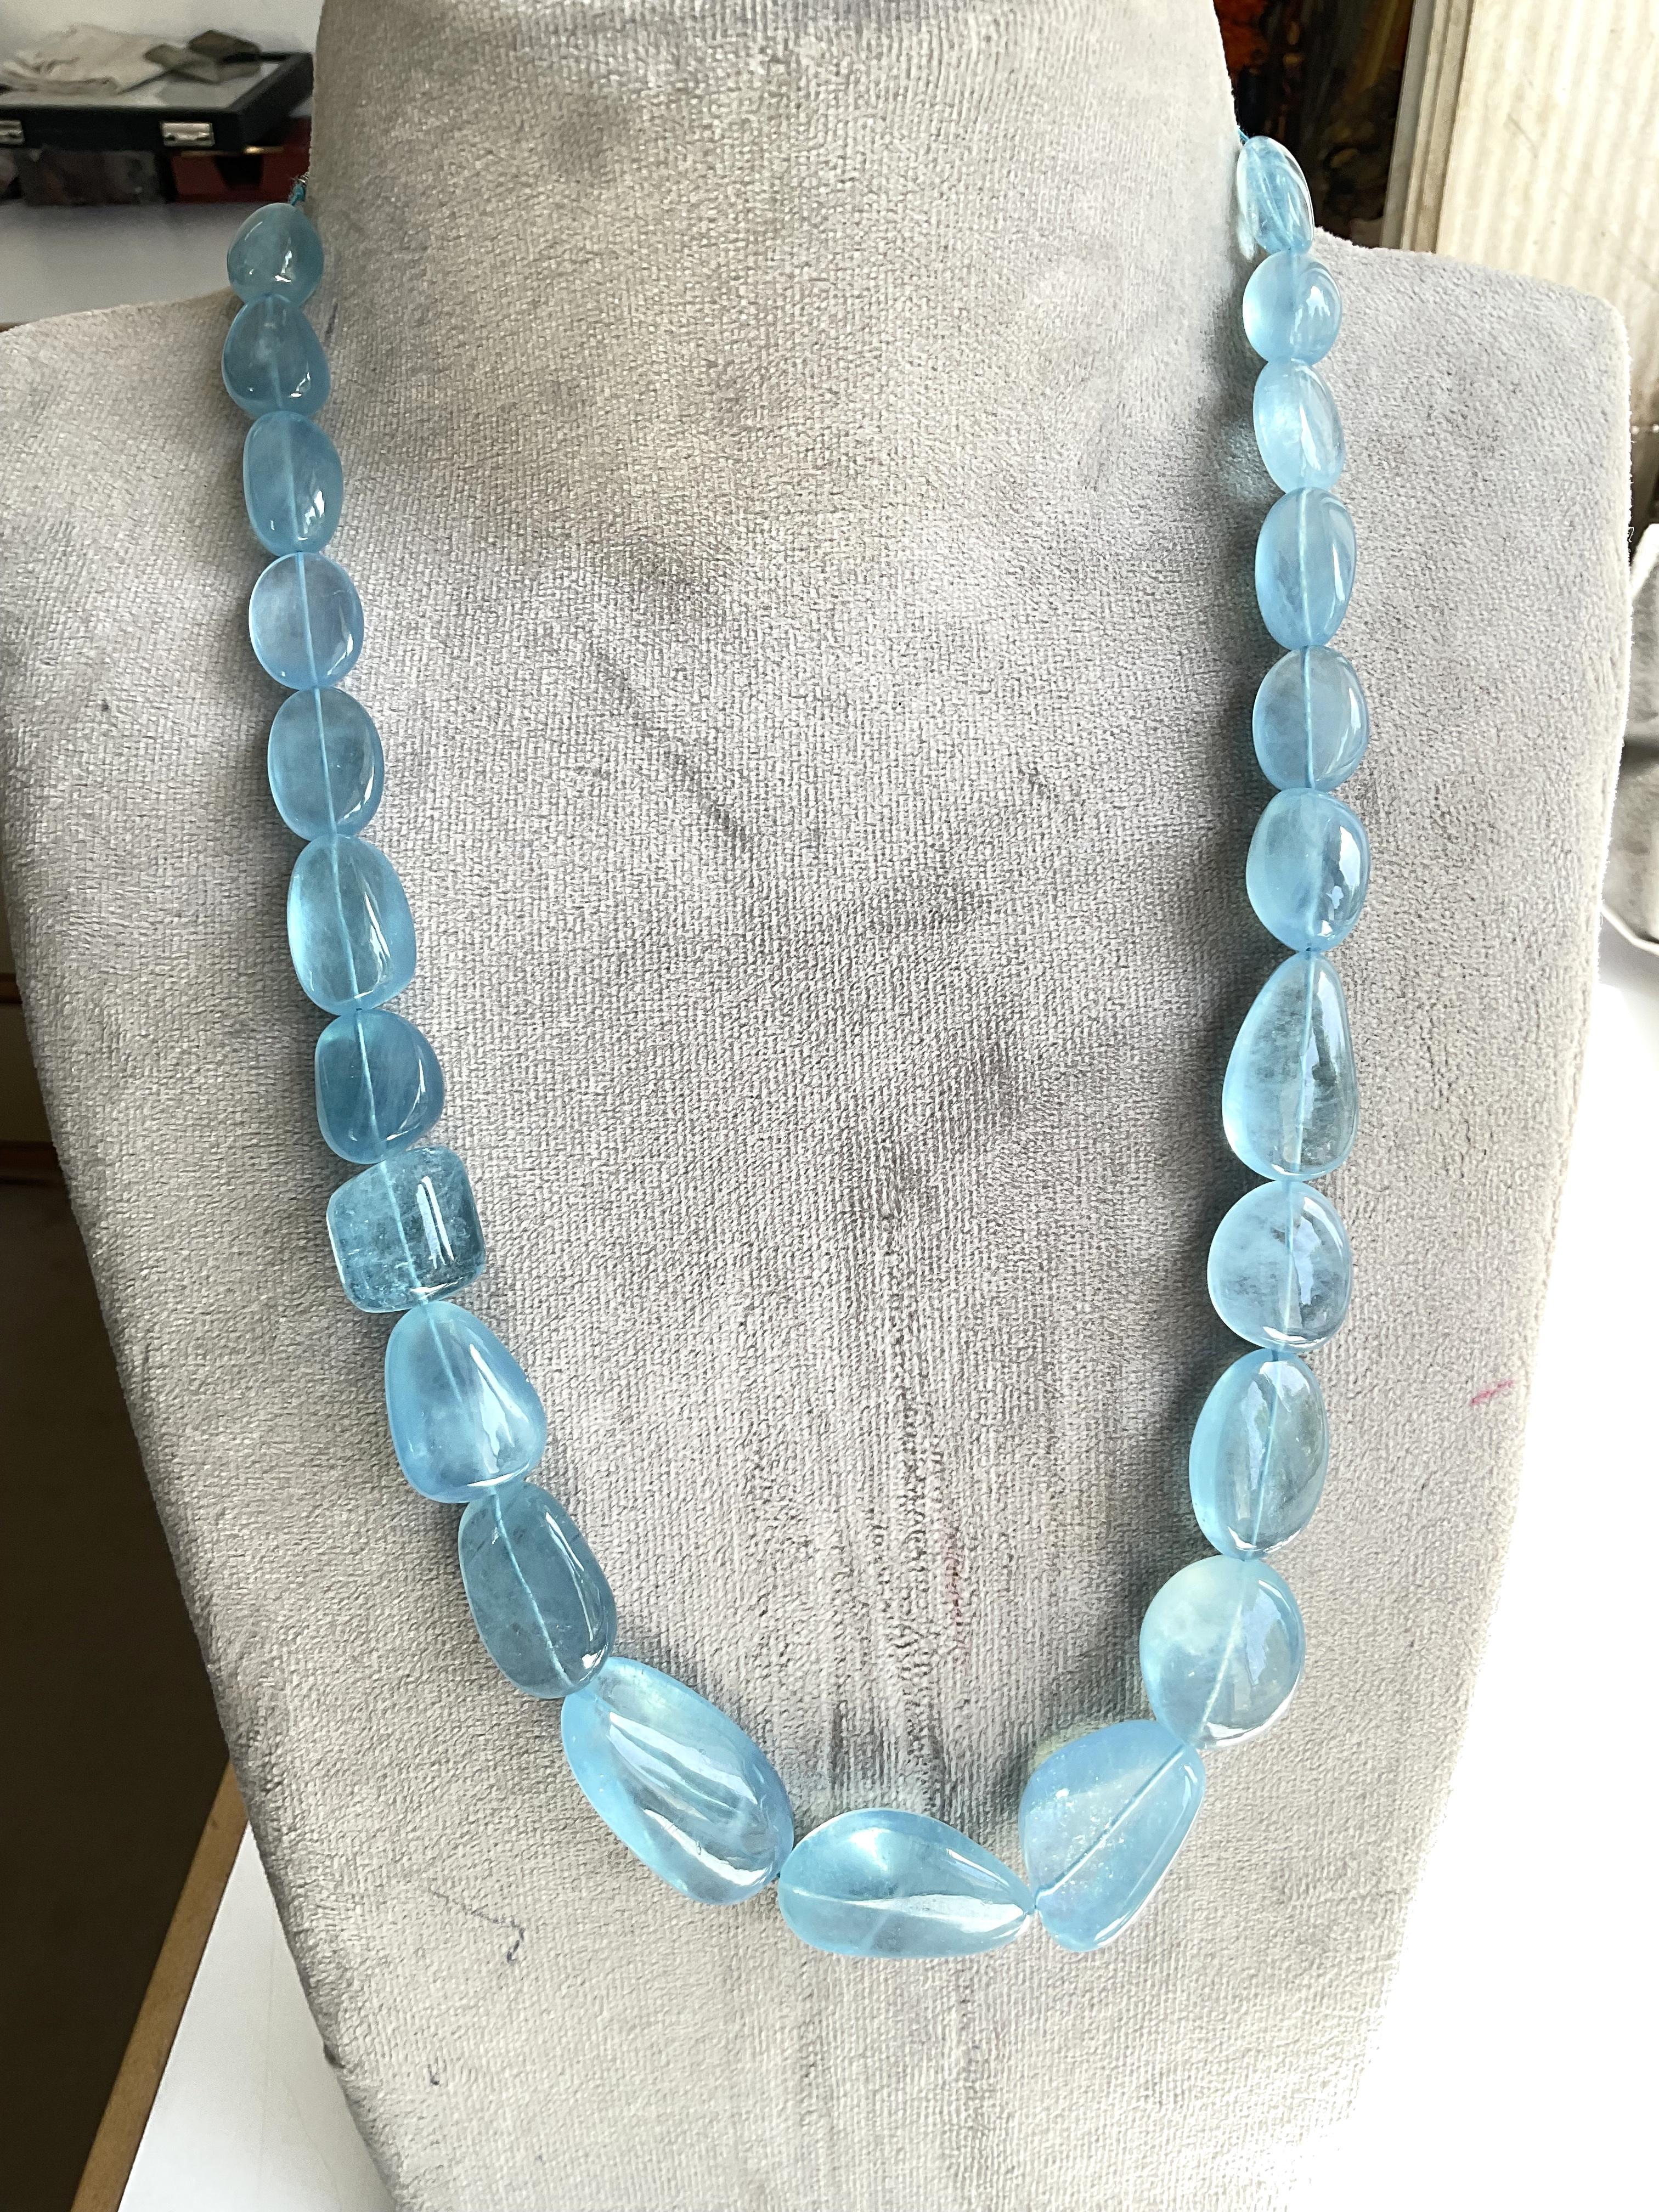 Tumbled 689.65 cts Aquamarine necklace smooth 1 Strand Necklace Top Quality Natural Gem  For Sale